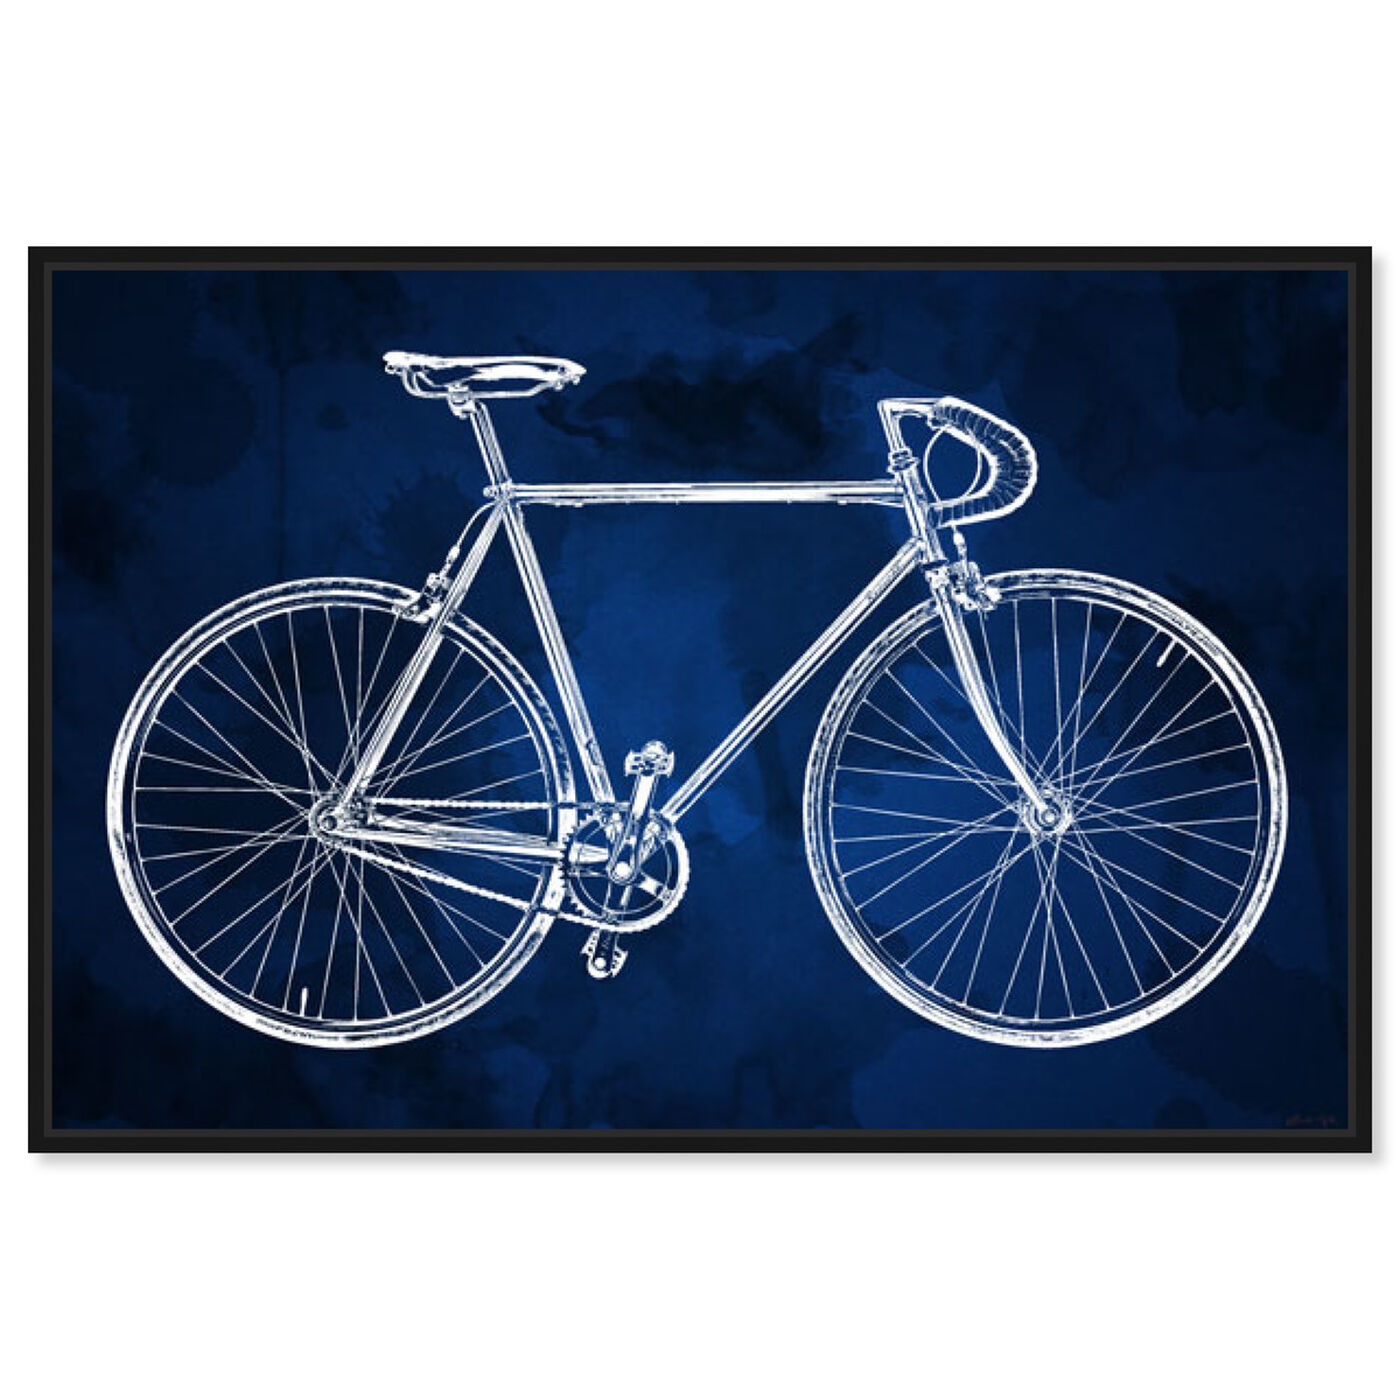 Front view of Fixie featuring transportation and bicycles art.